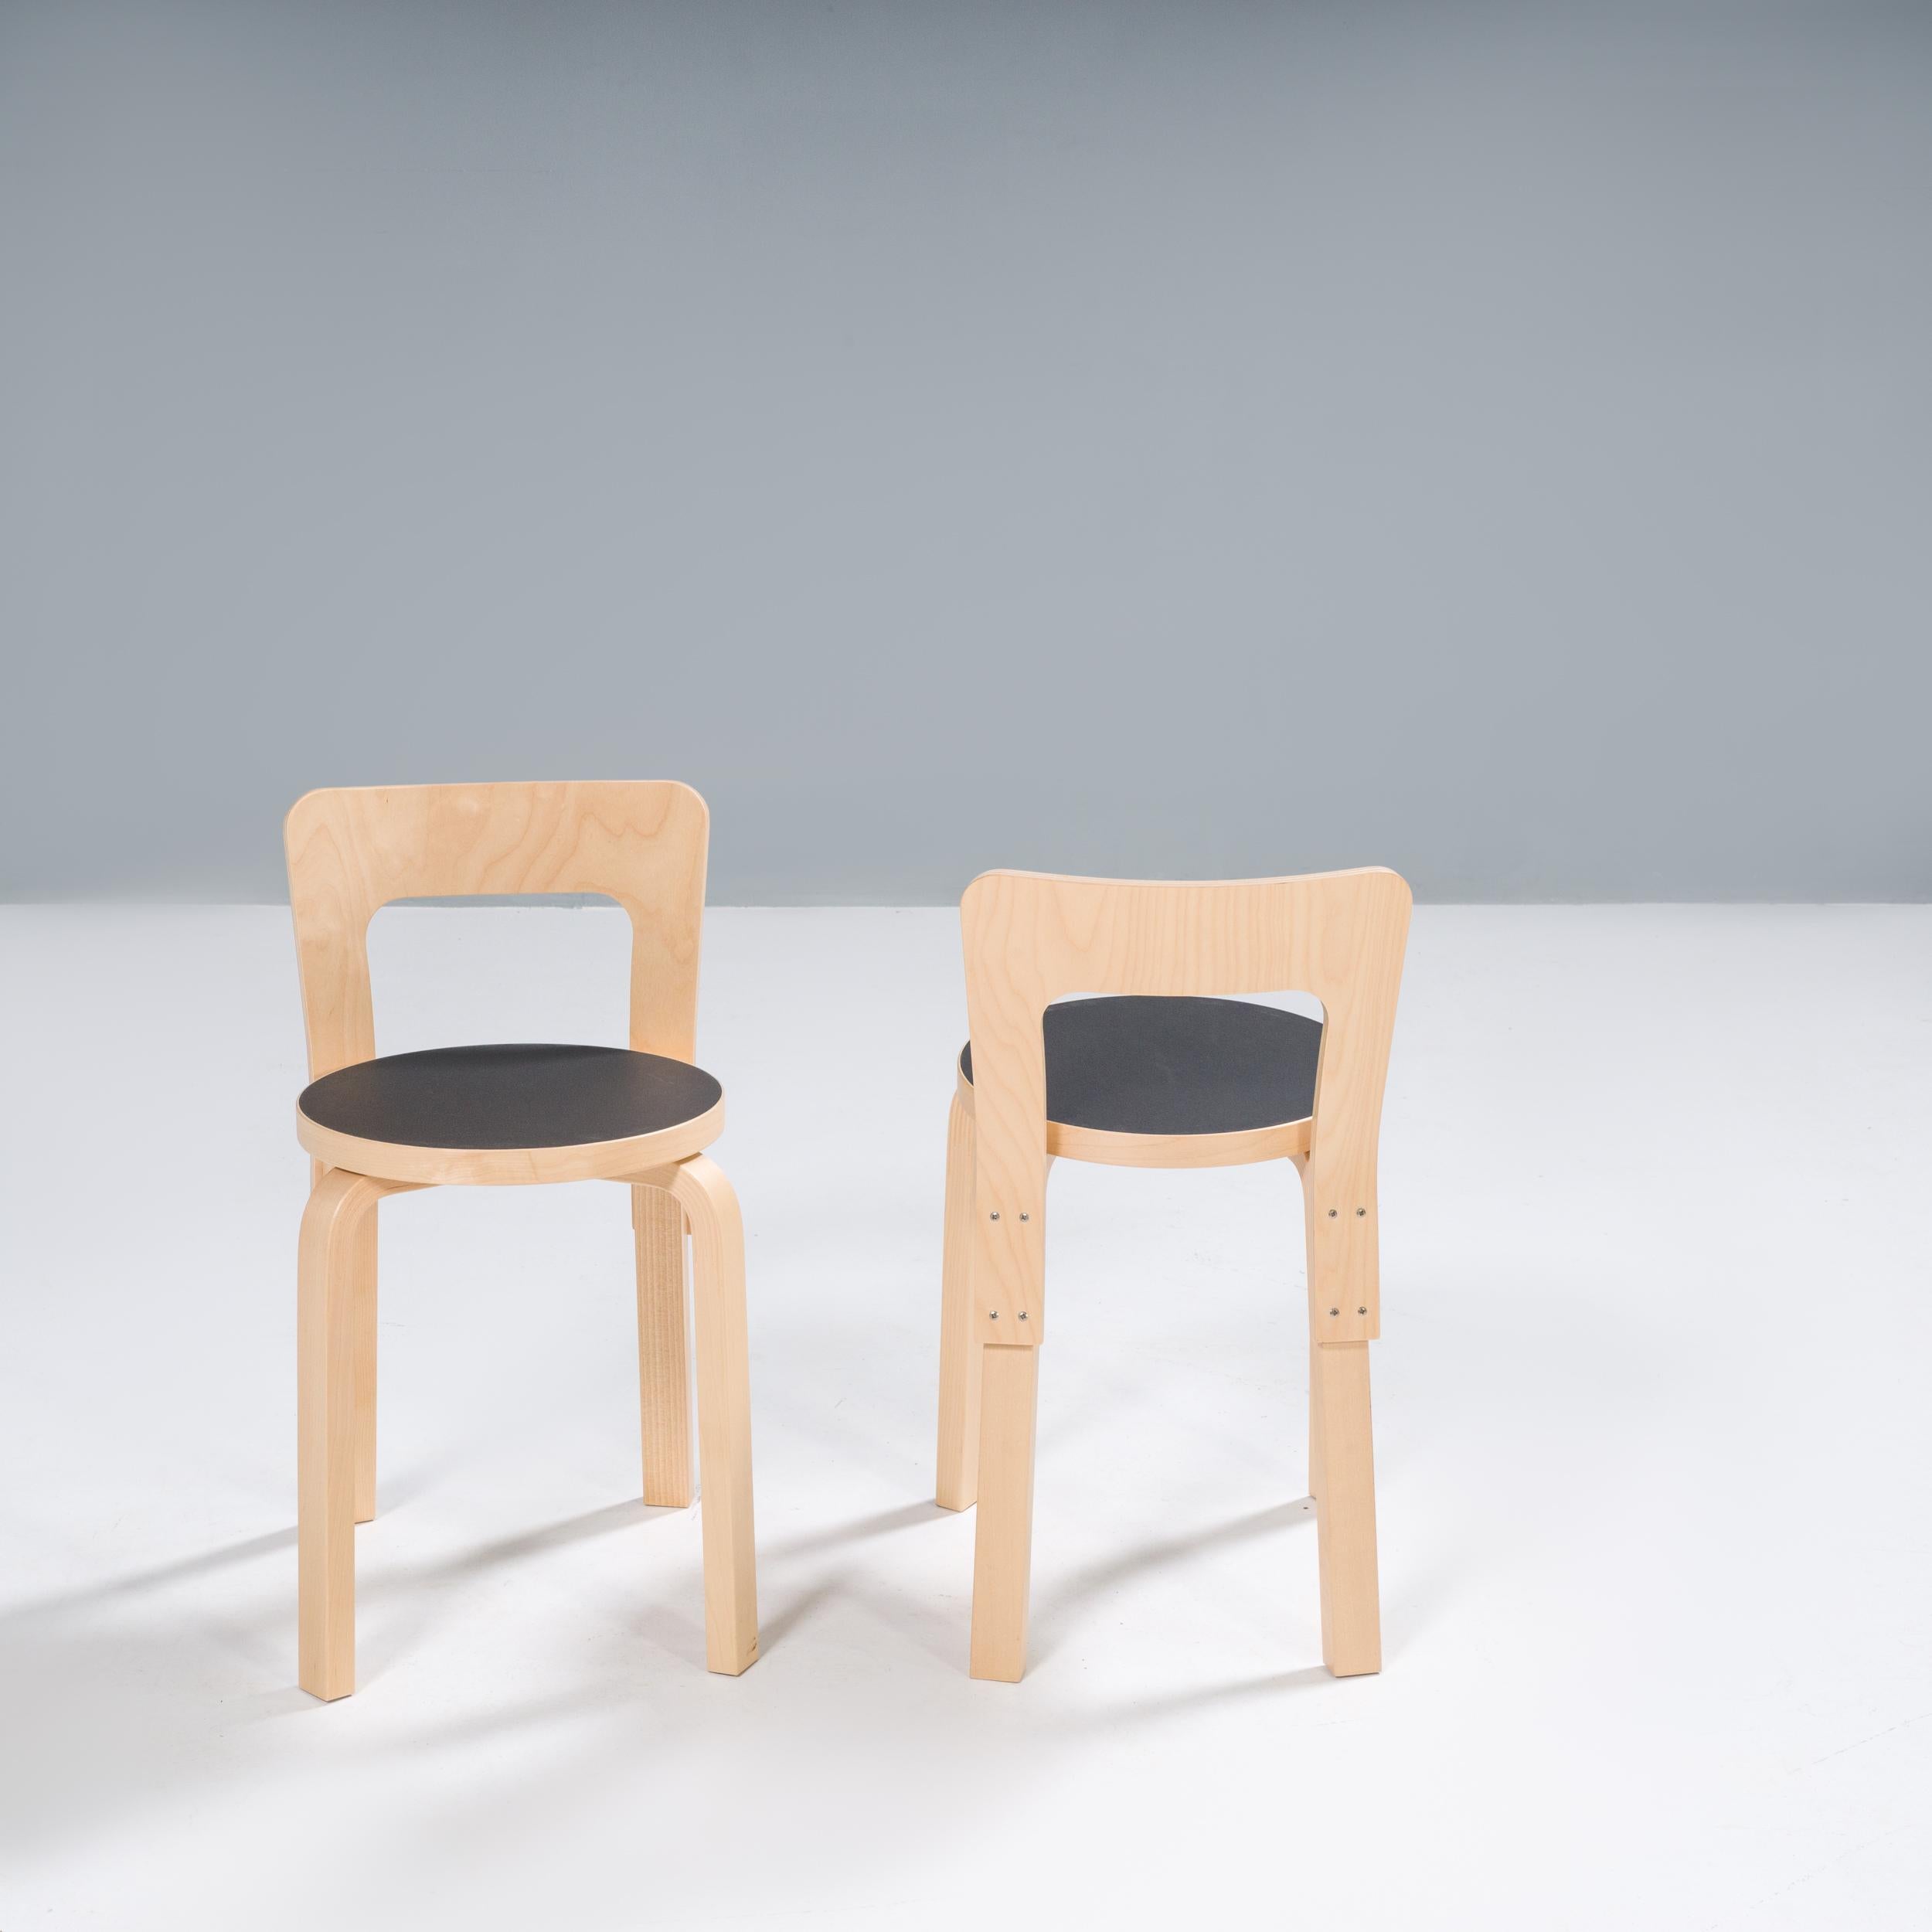 Originally designed by Alvar Aalto in 1935, the 65 chair formed part of his iconic L-leg collection.

Aalto created the collection after experimenting with bending wood in the early 1920s, before patenting his technique in 1933.

The 65 chair is